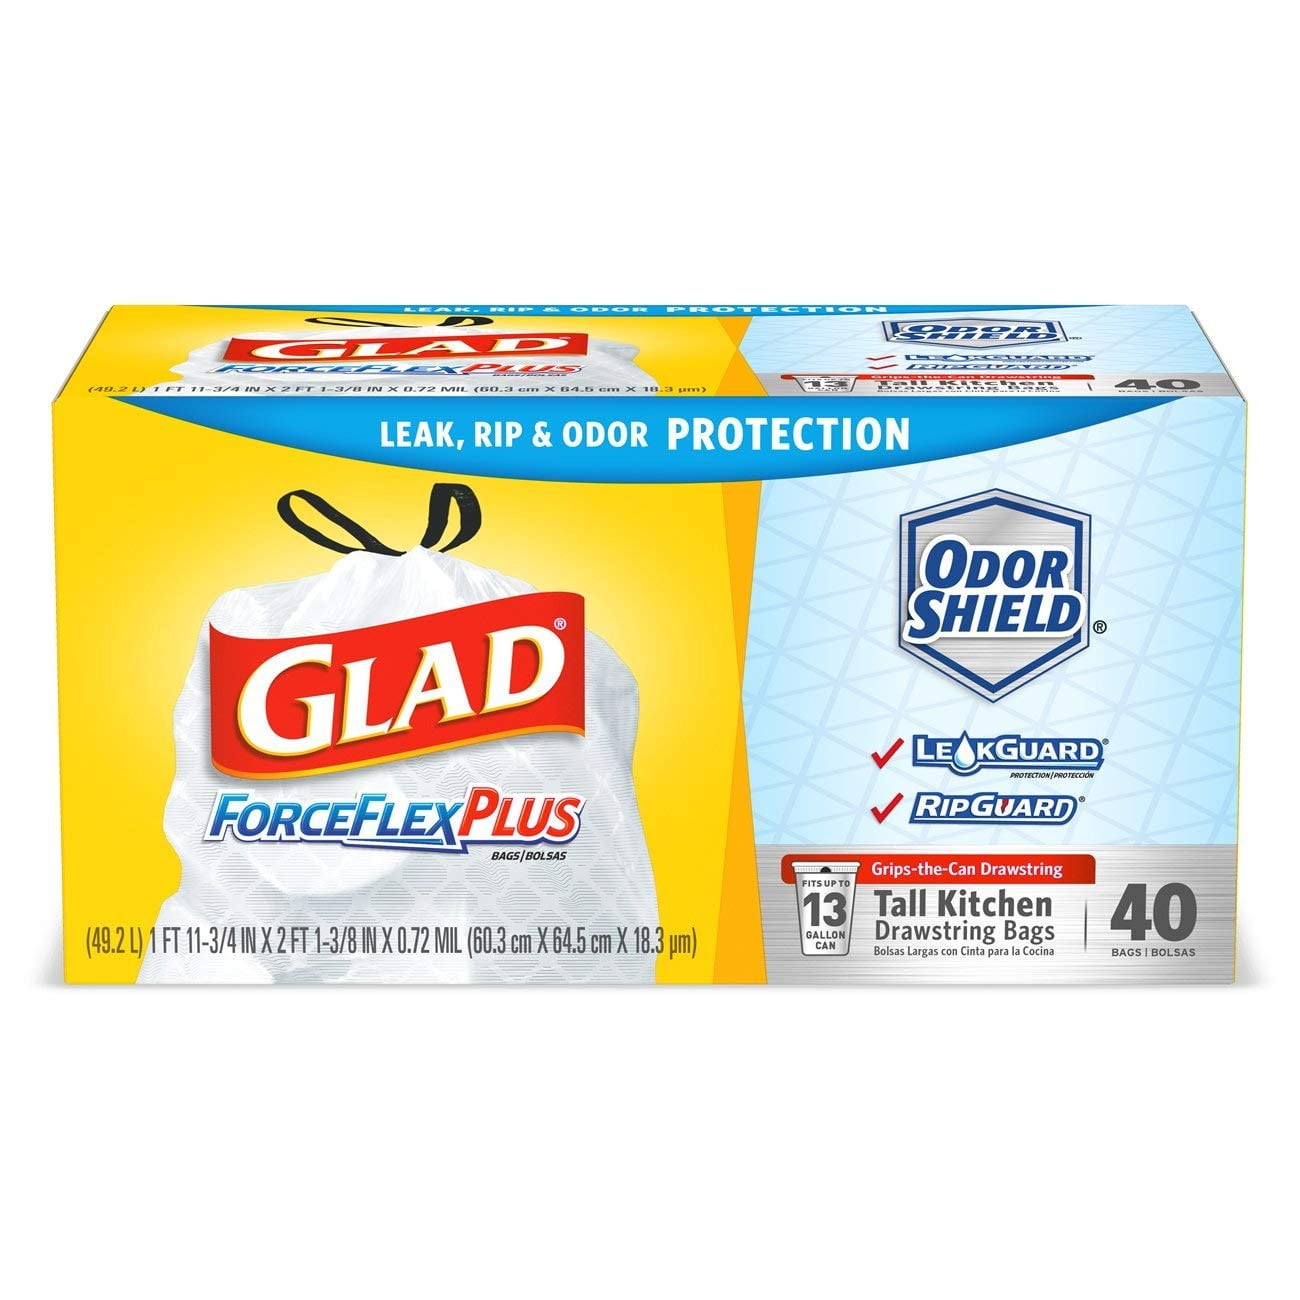 Glad Force Flex Odor Shield trash bags are 35% off for Prime Day